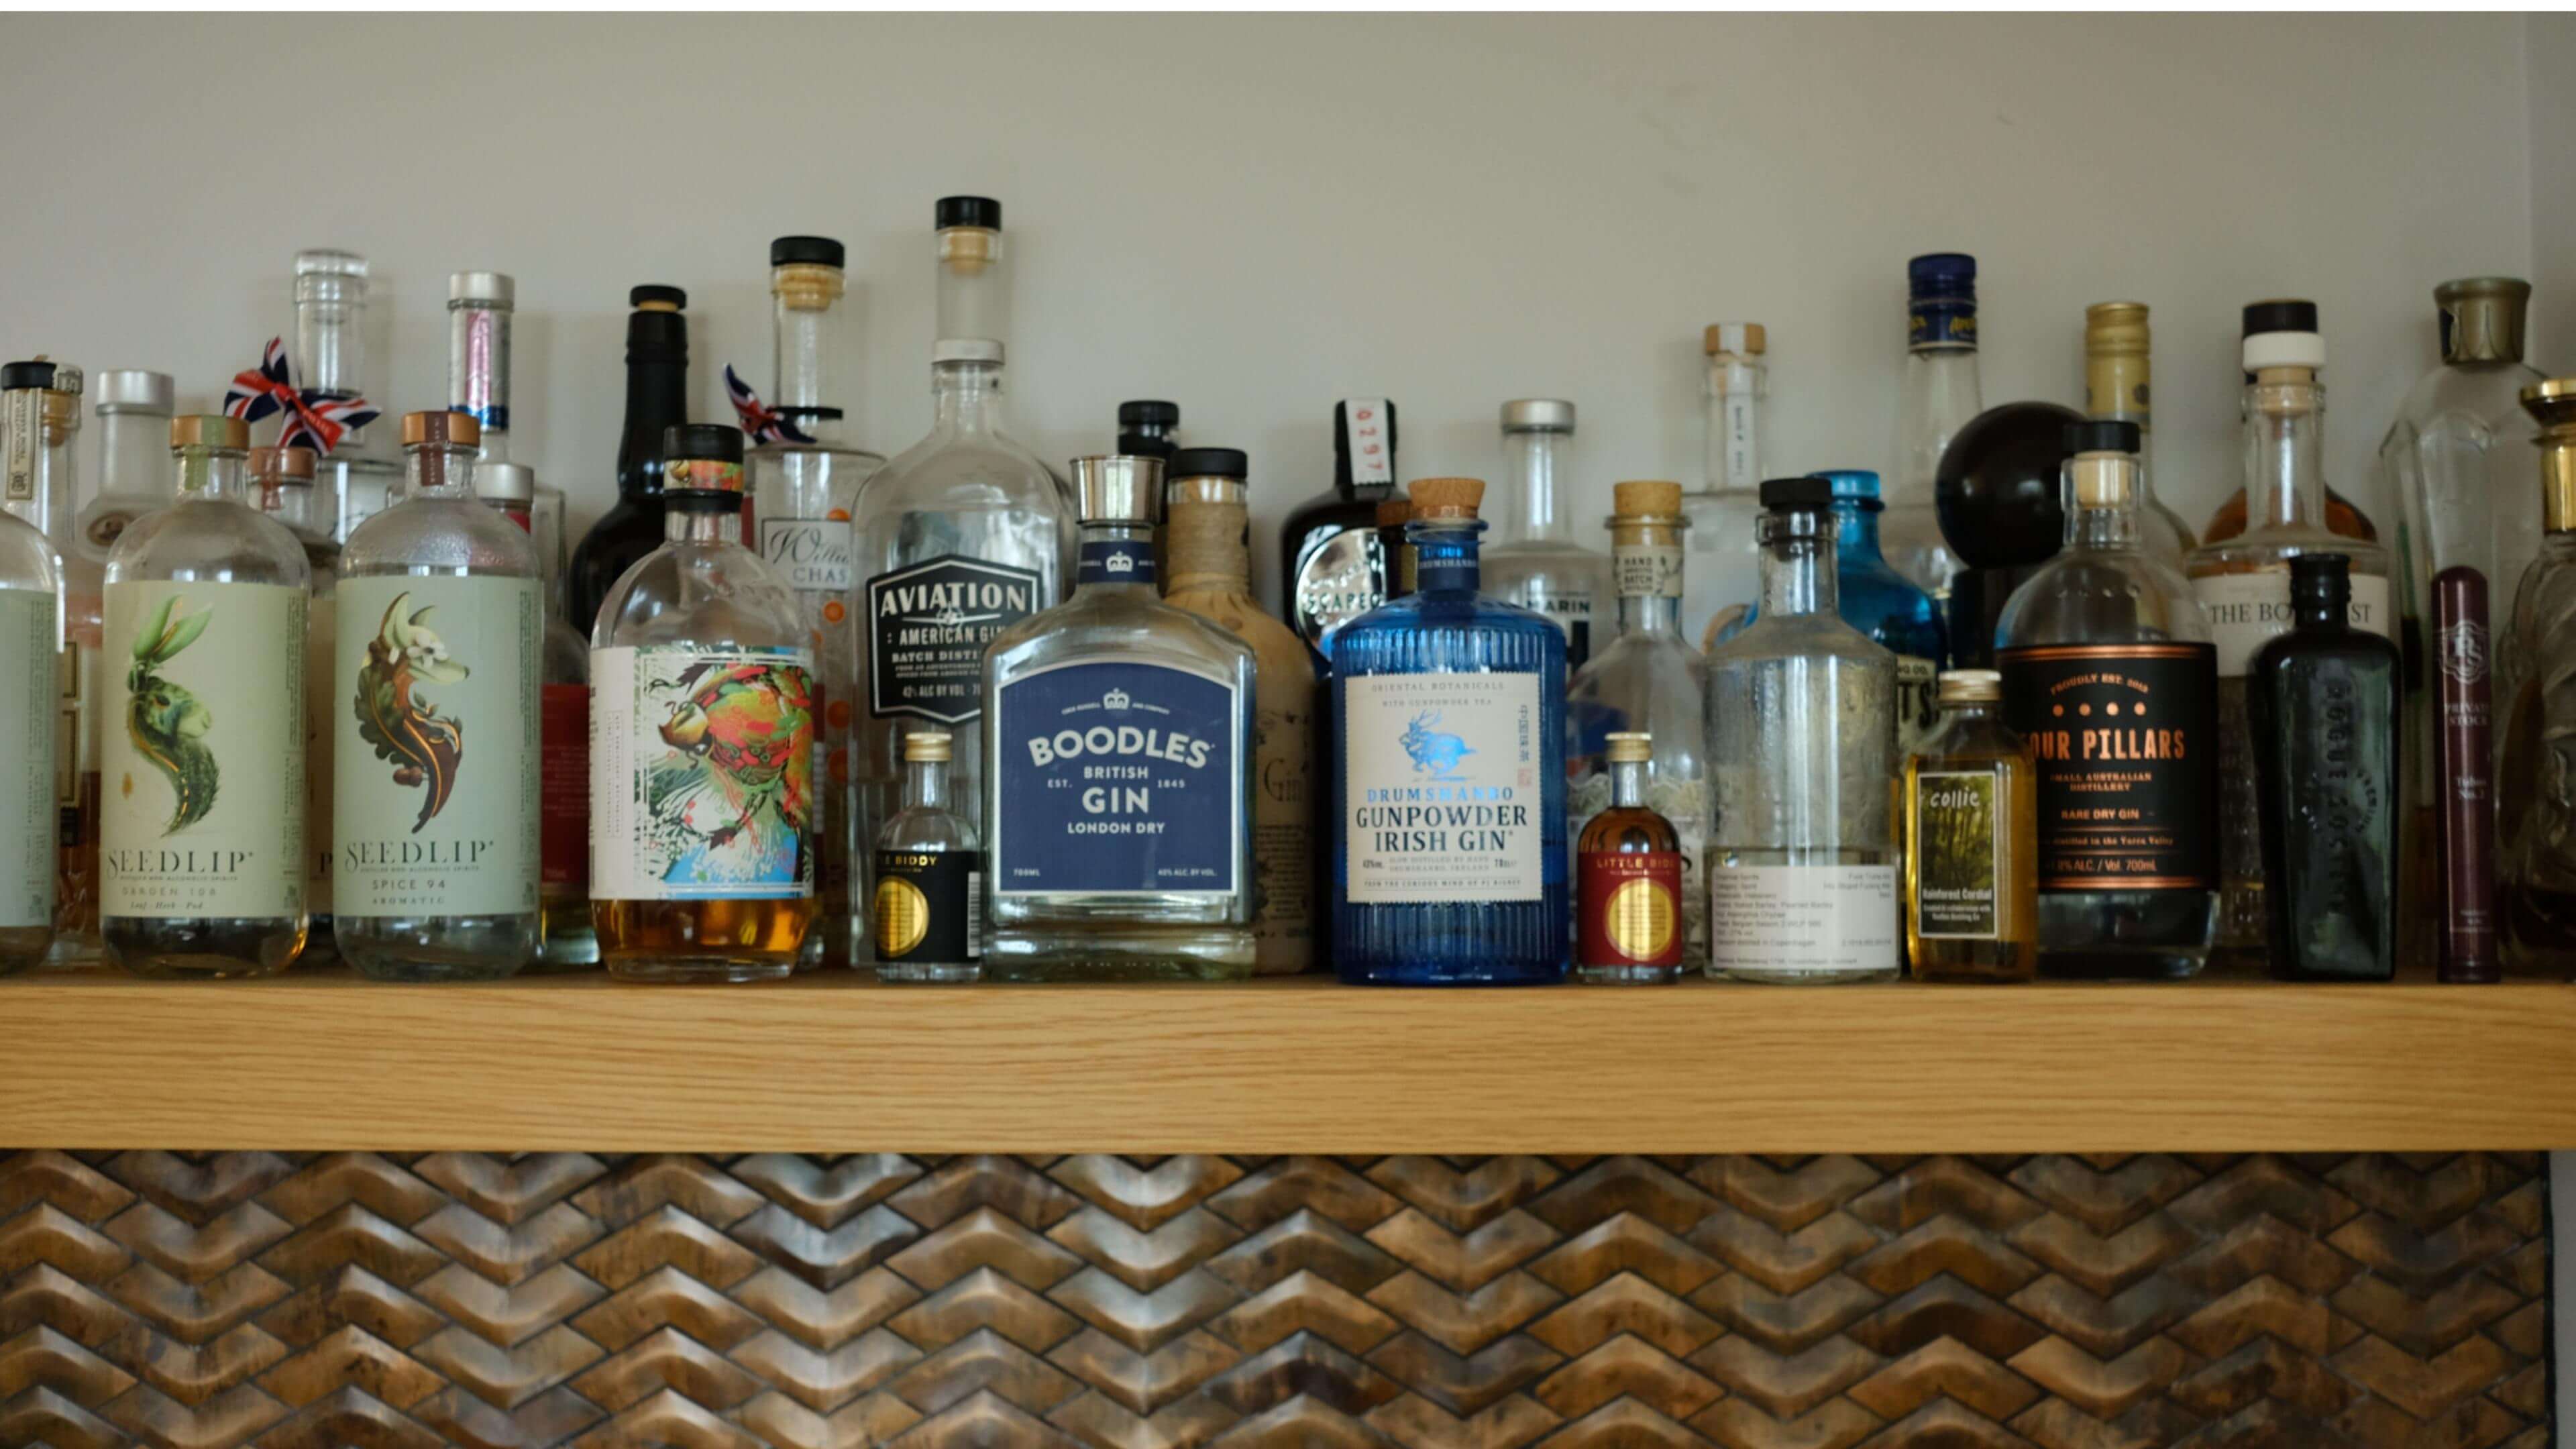 Image of Sid's drink shelf at home, with bottles taking up the whole shelf